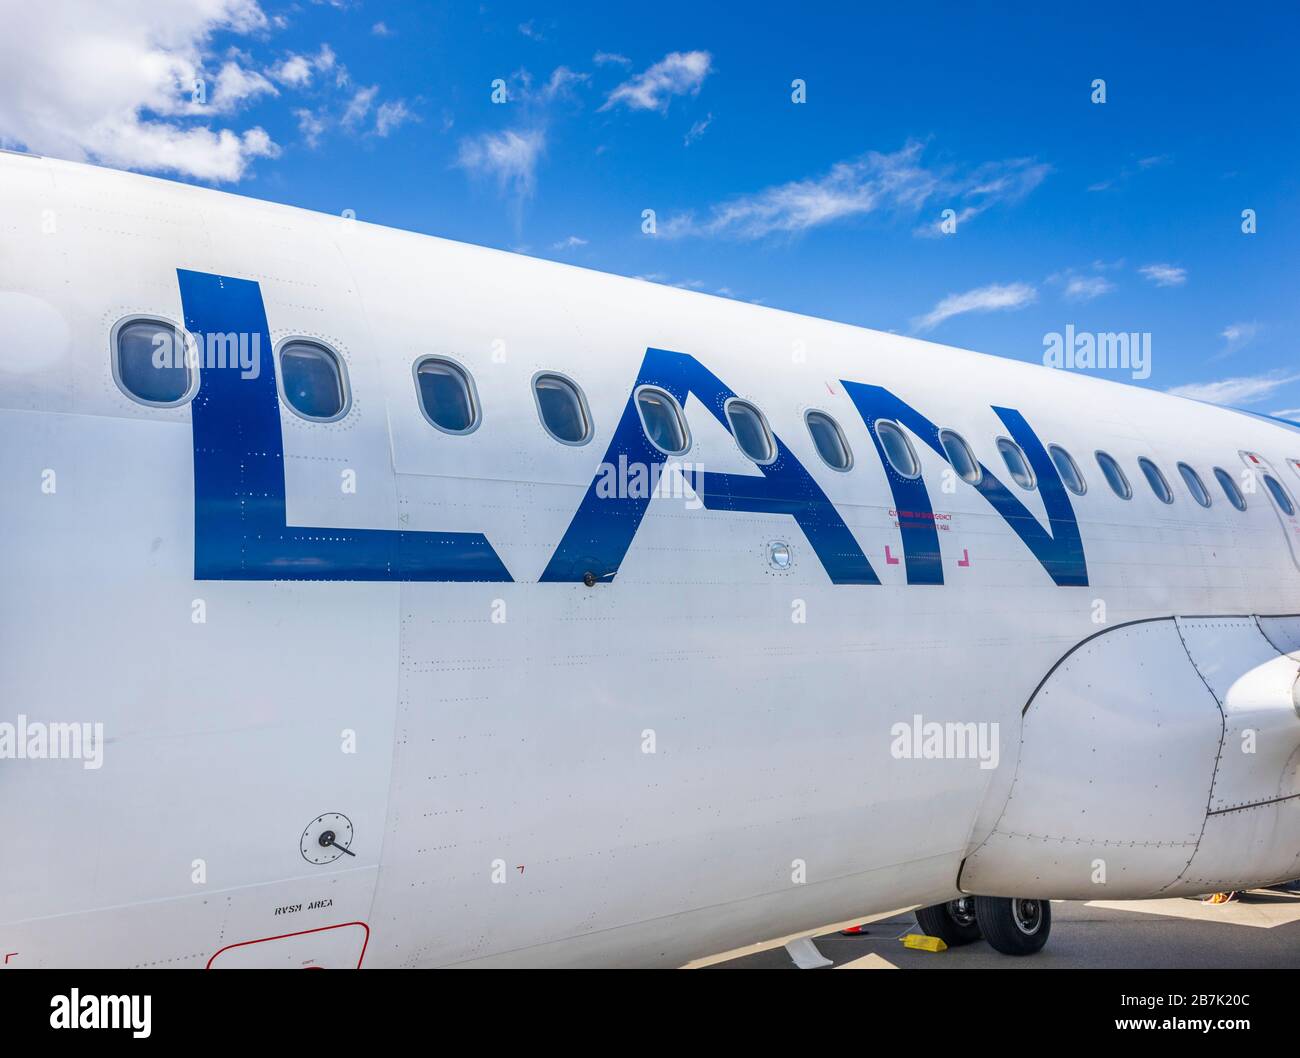 LAN (LATAM Airlines) aircraft on the runway at Teniente Julio Gallardo Airport serving Puerto Natales, Magallanes Region of Patagonia, southern Chile Stock Photo